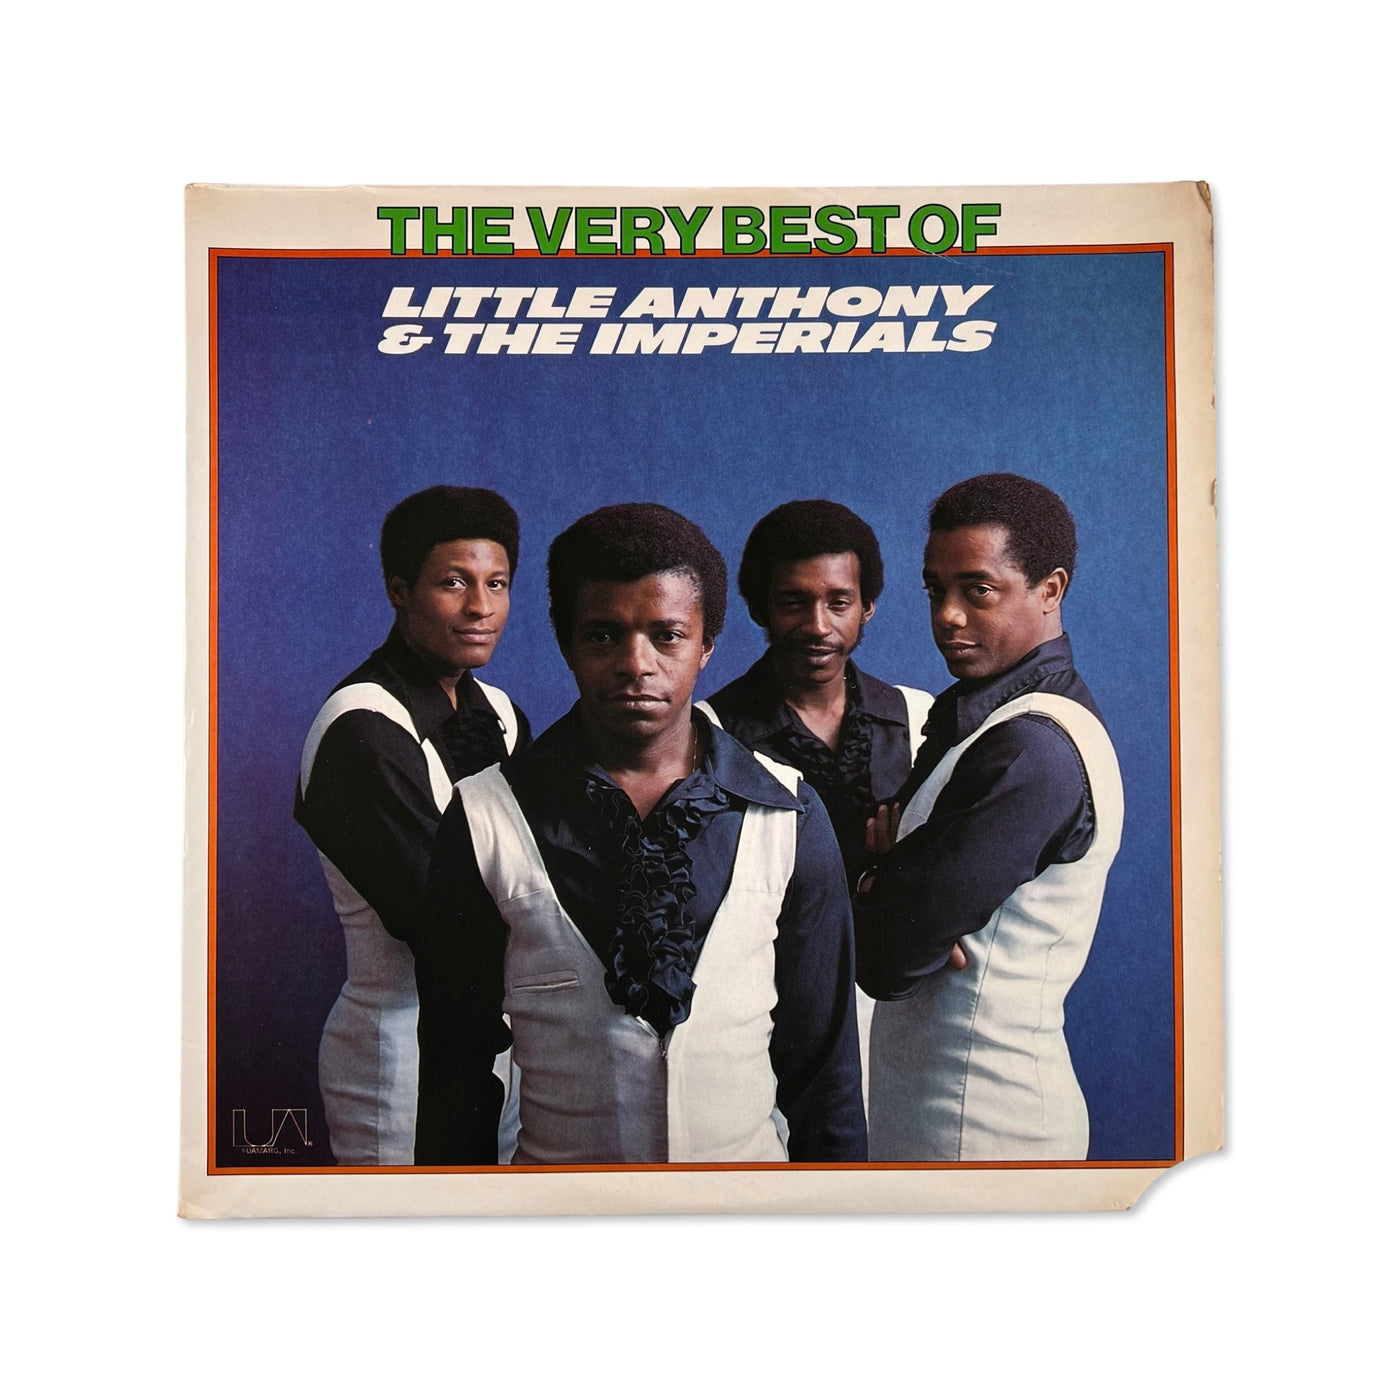 Little Anthony & The Imperials – The Very Best Of Little Anthony & The Imperials